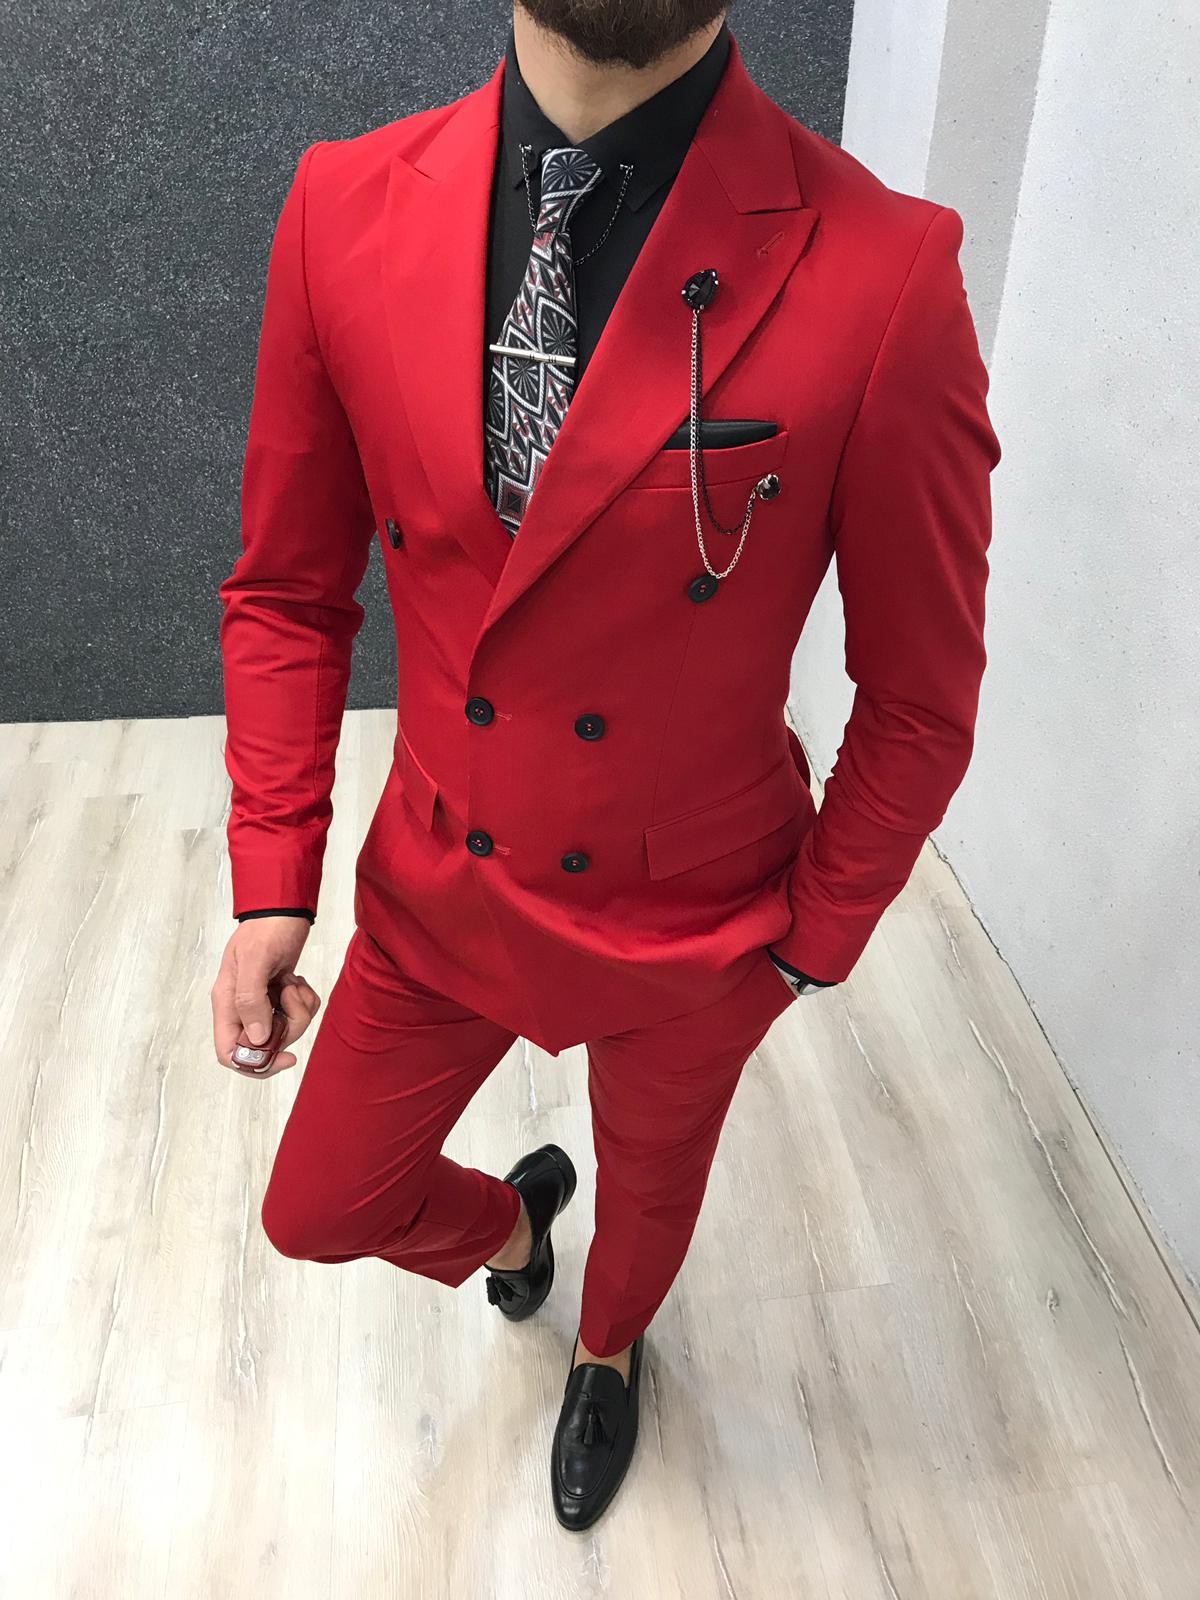 Buy Red Double Breasted Suit by Gentwith.com with Free Shipping